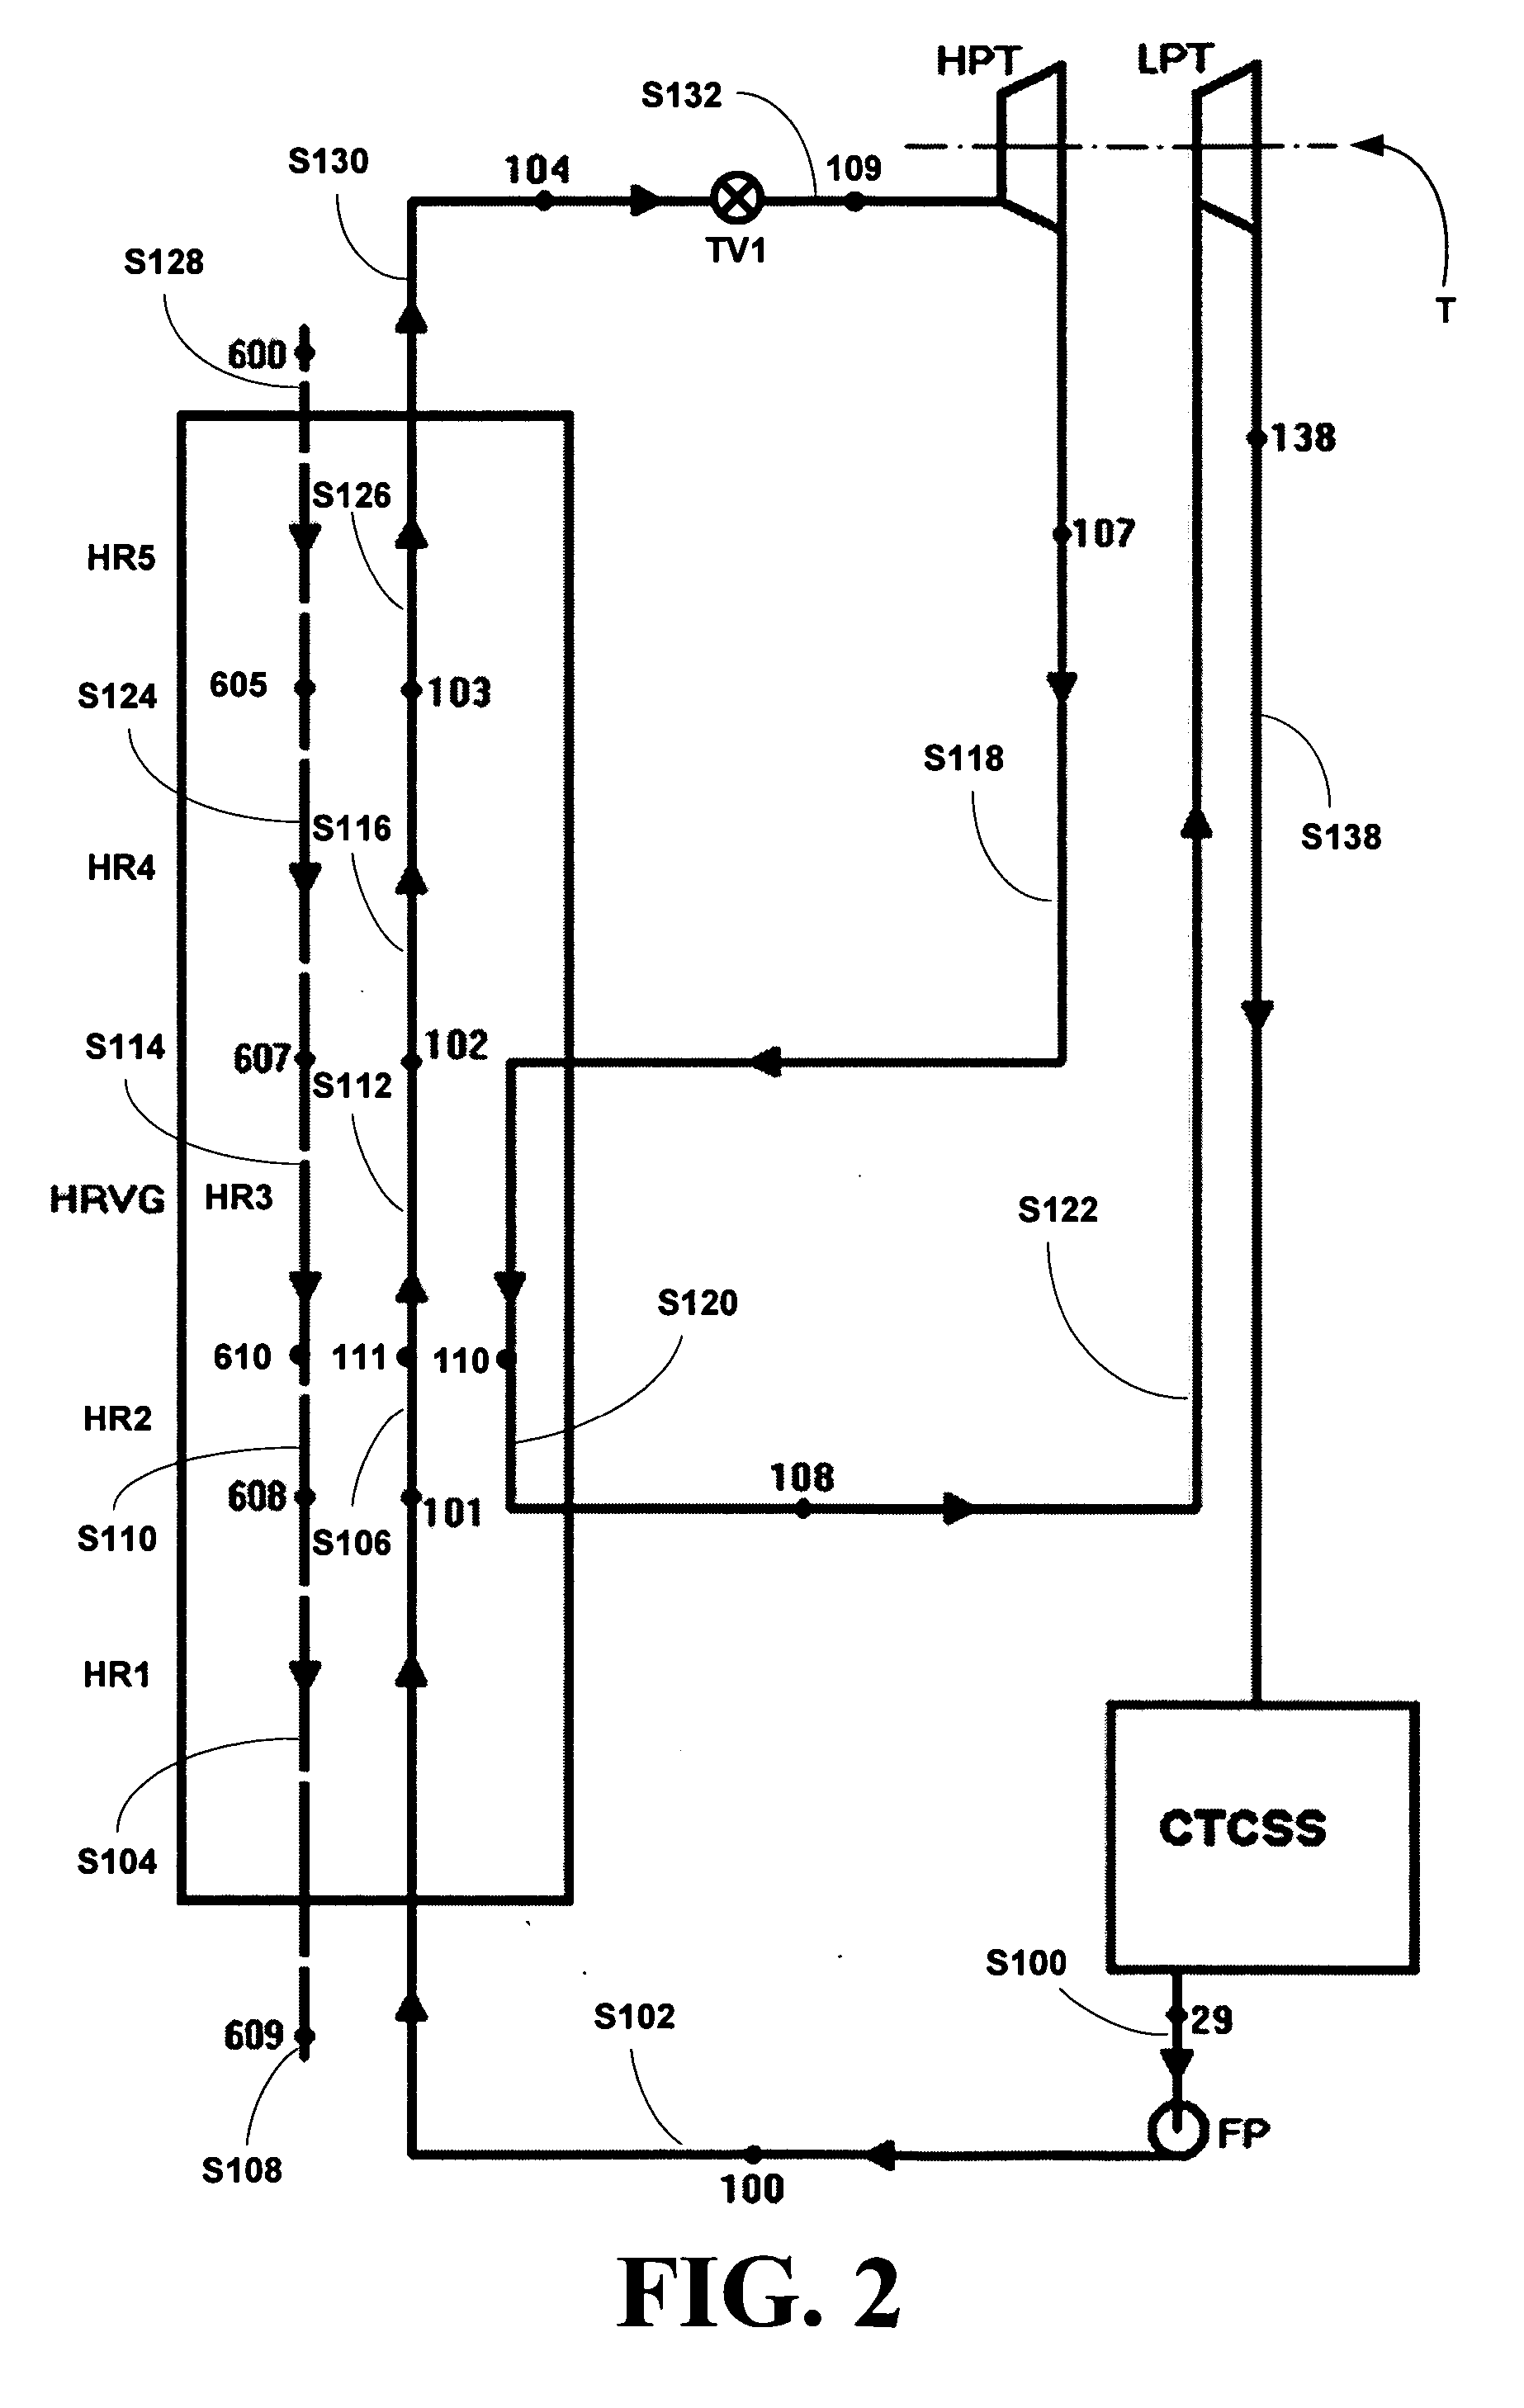 System and apparatus for power system utilizing wide temperature range heat sources